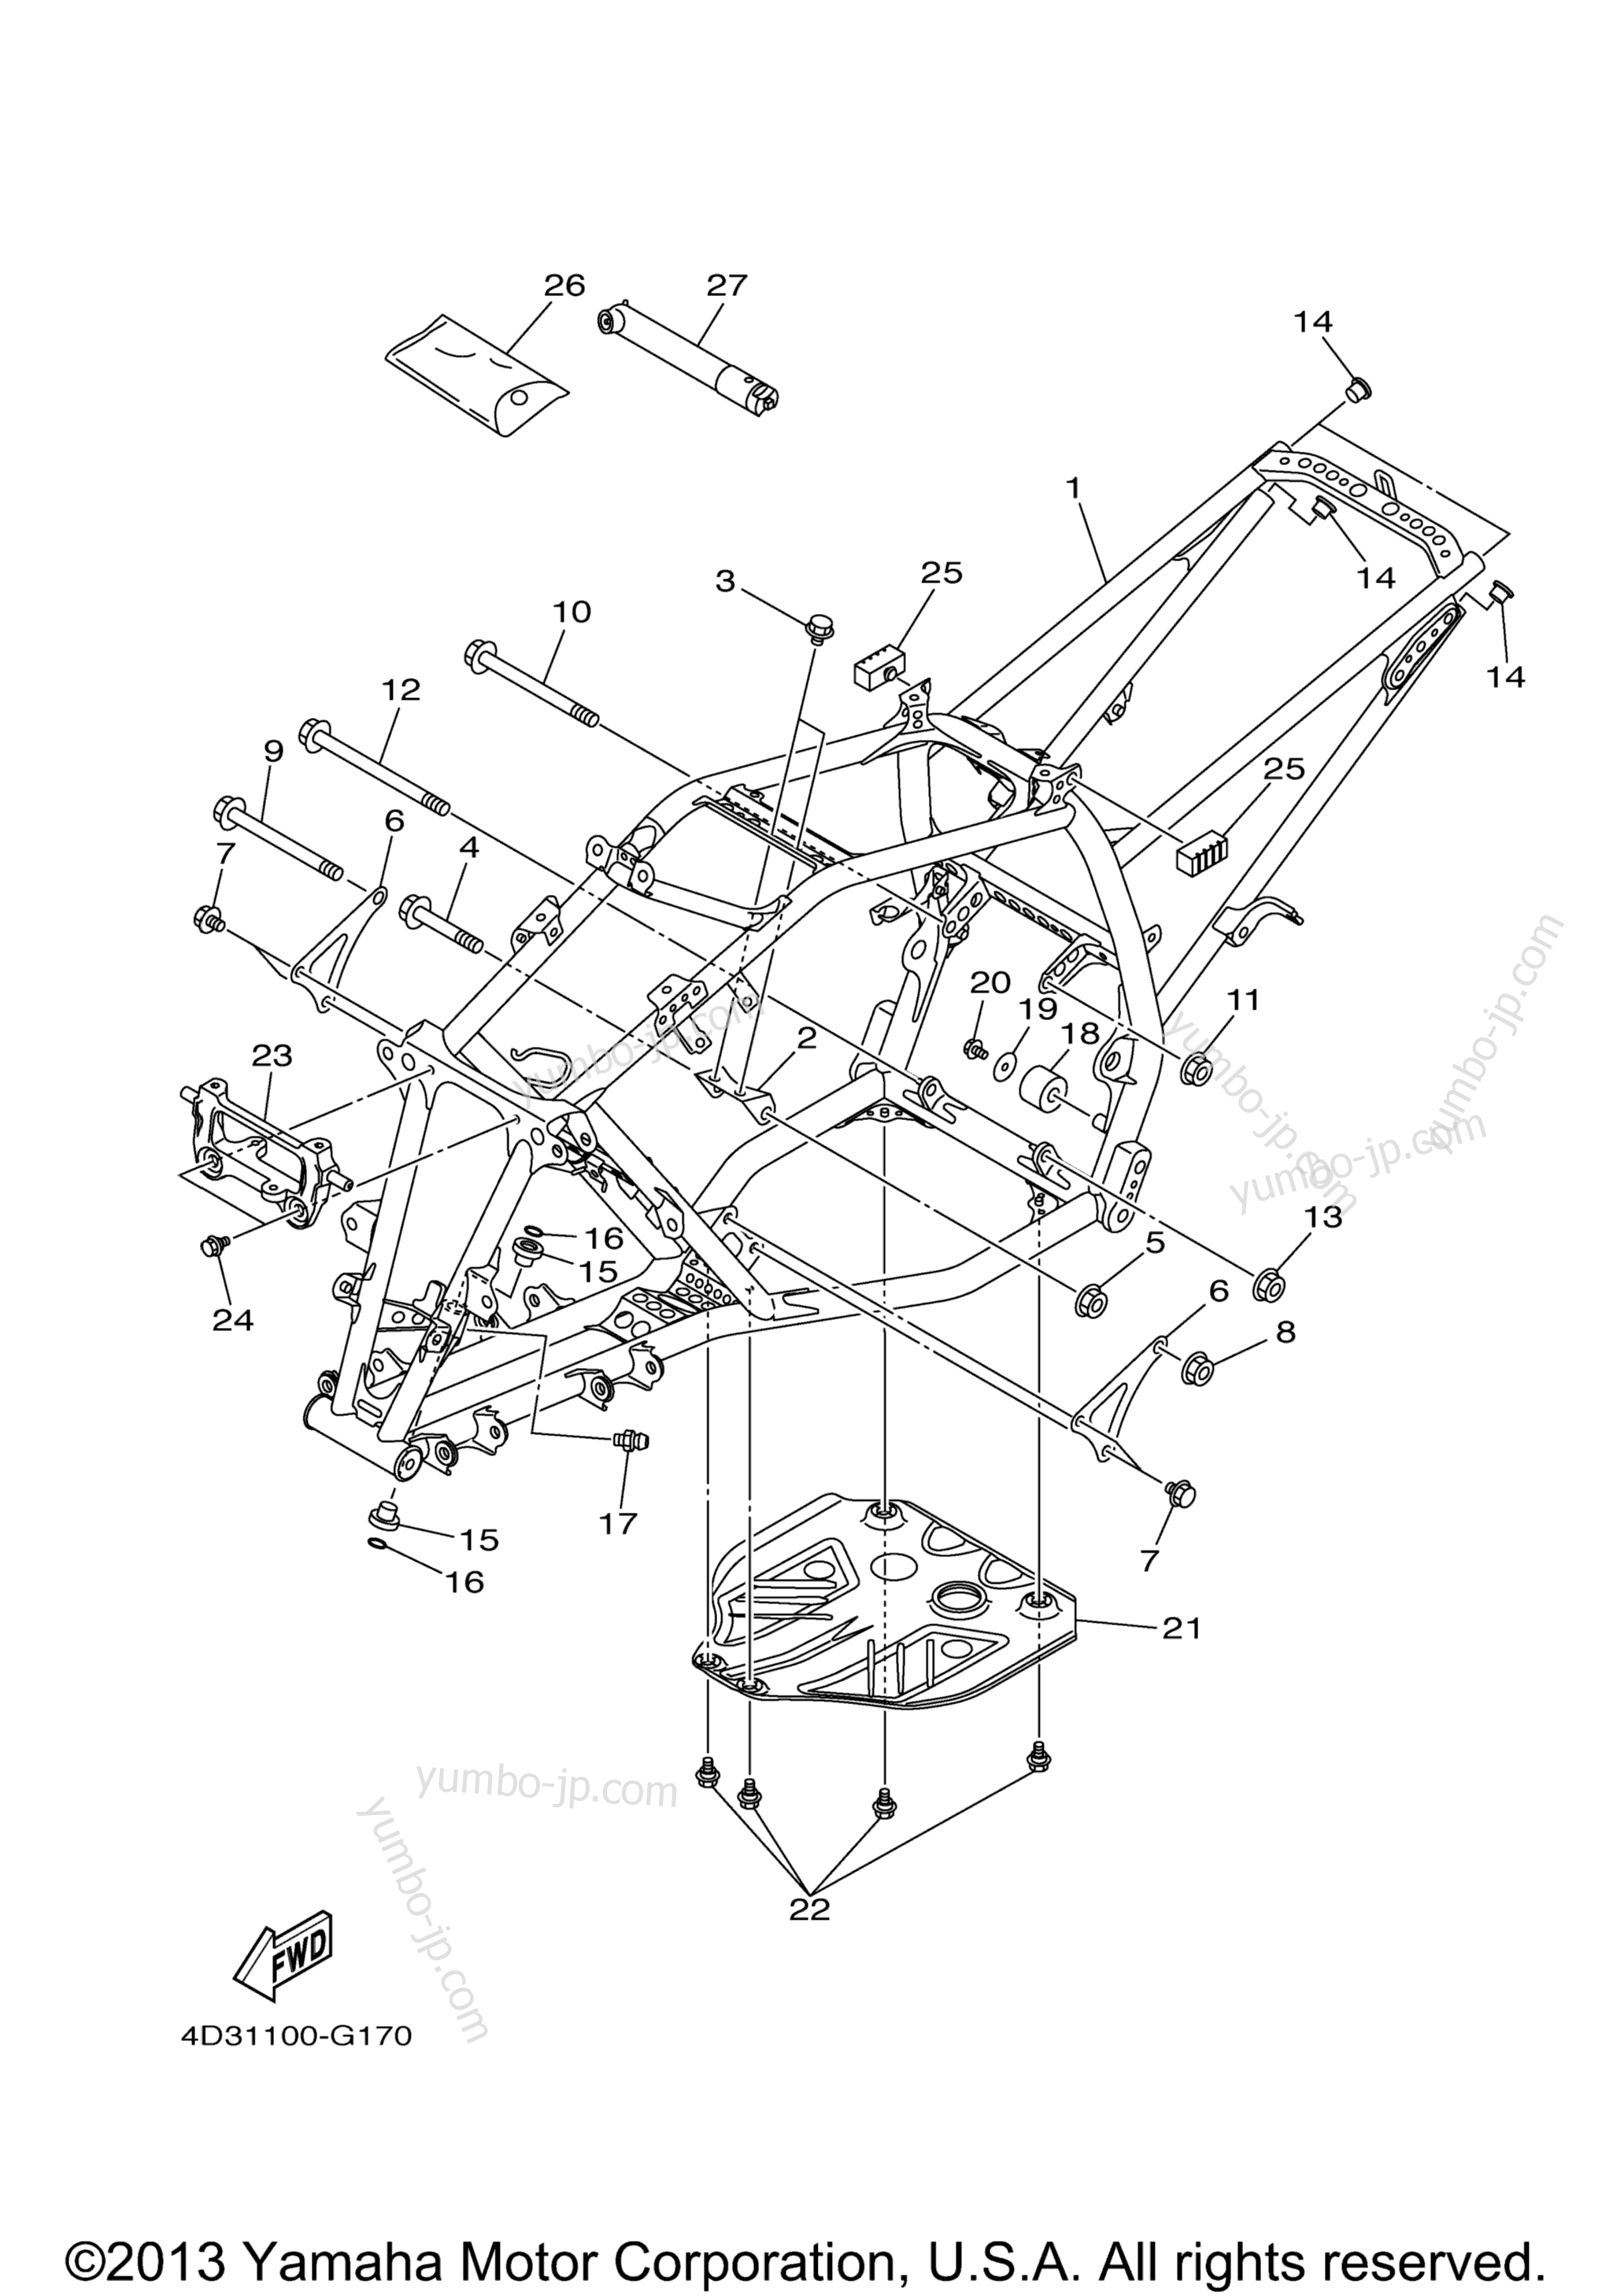 FRAME for ATVs YAMAHA RAPTOR 250 SPECIAL EDITION (YFM25RSPX) 2008 year